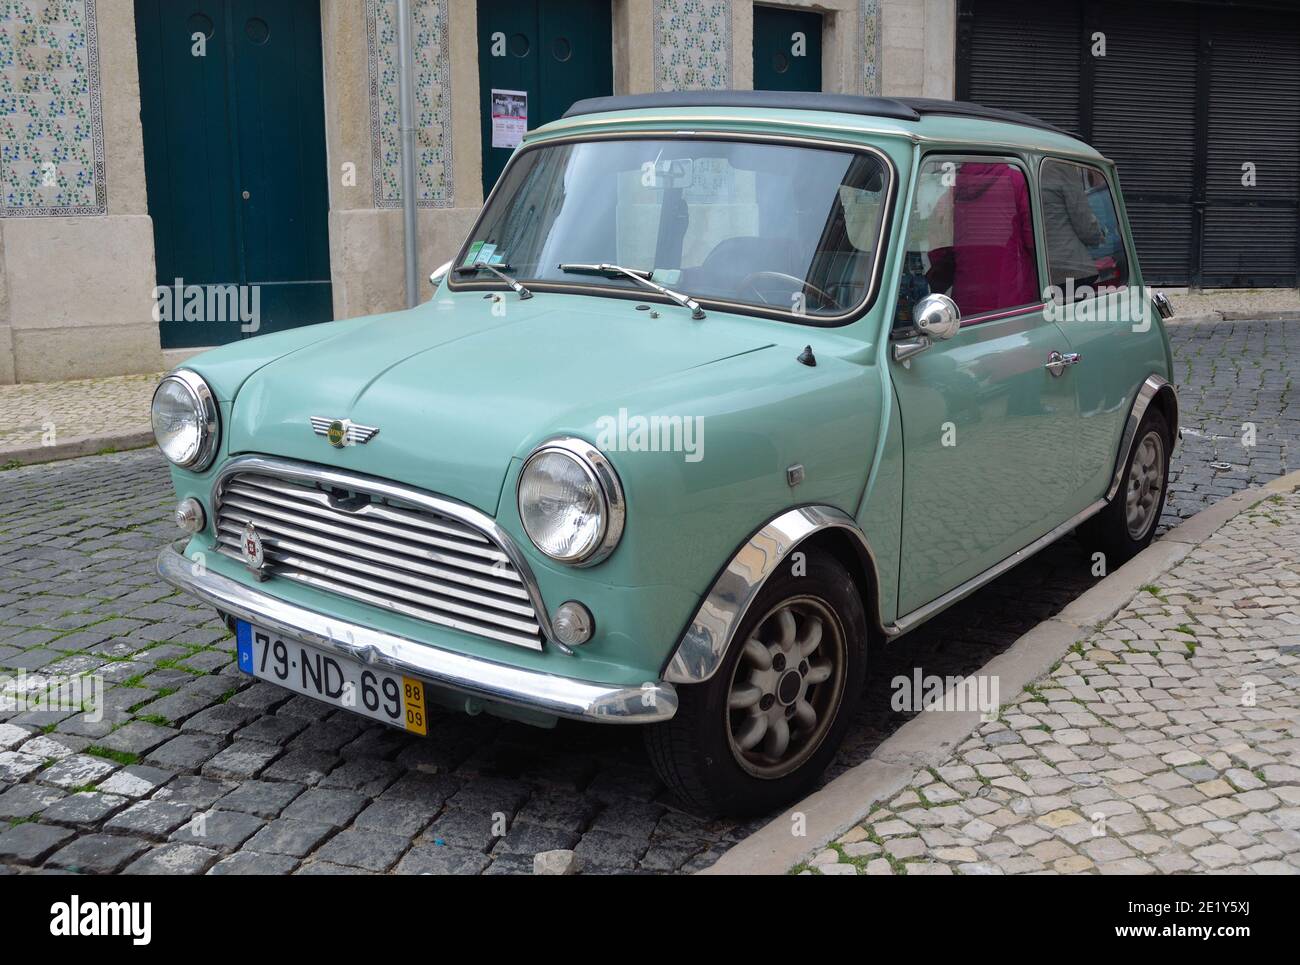 Classic light blue Austin Mini motorcar in the streets of the Alfama district of Lisbon Portugal. Stock Photo